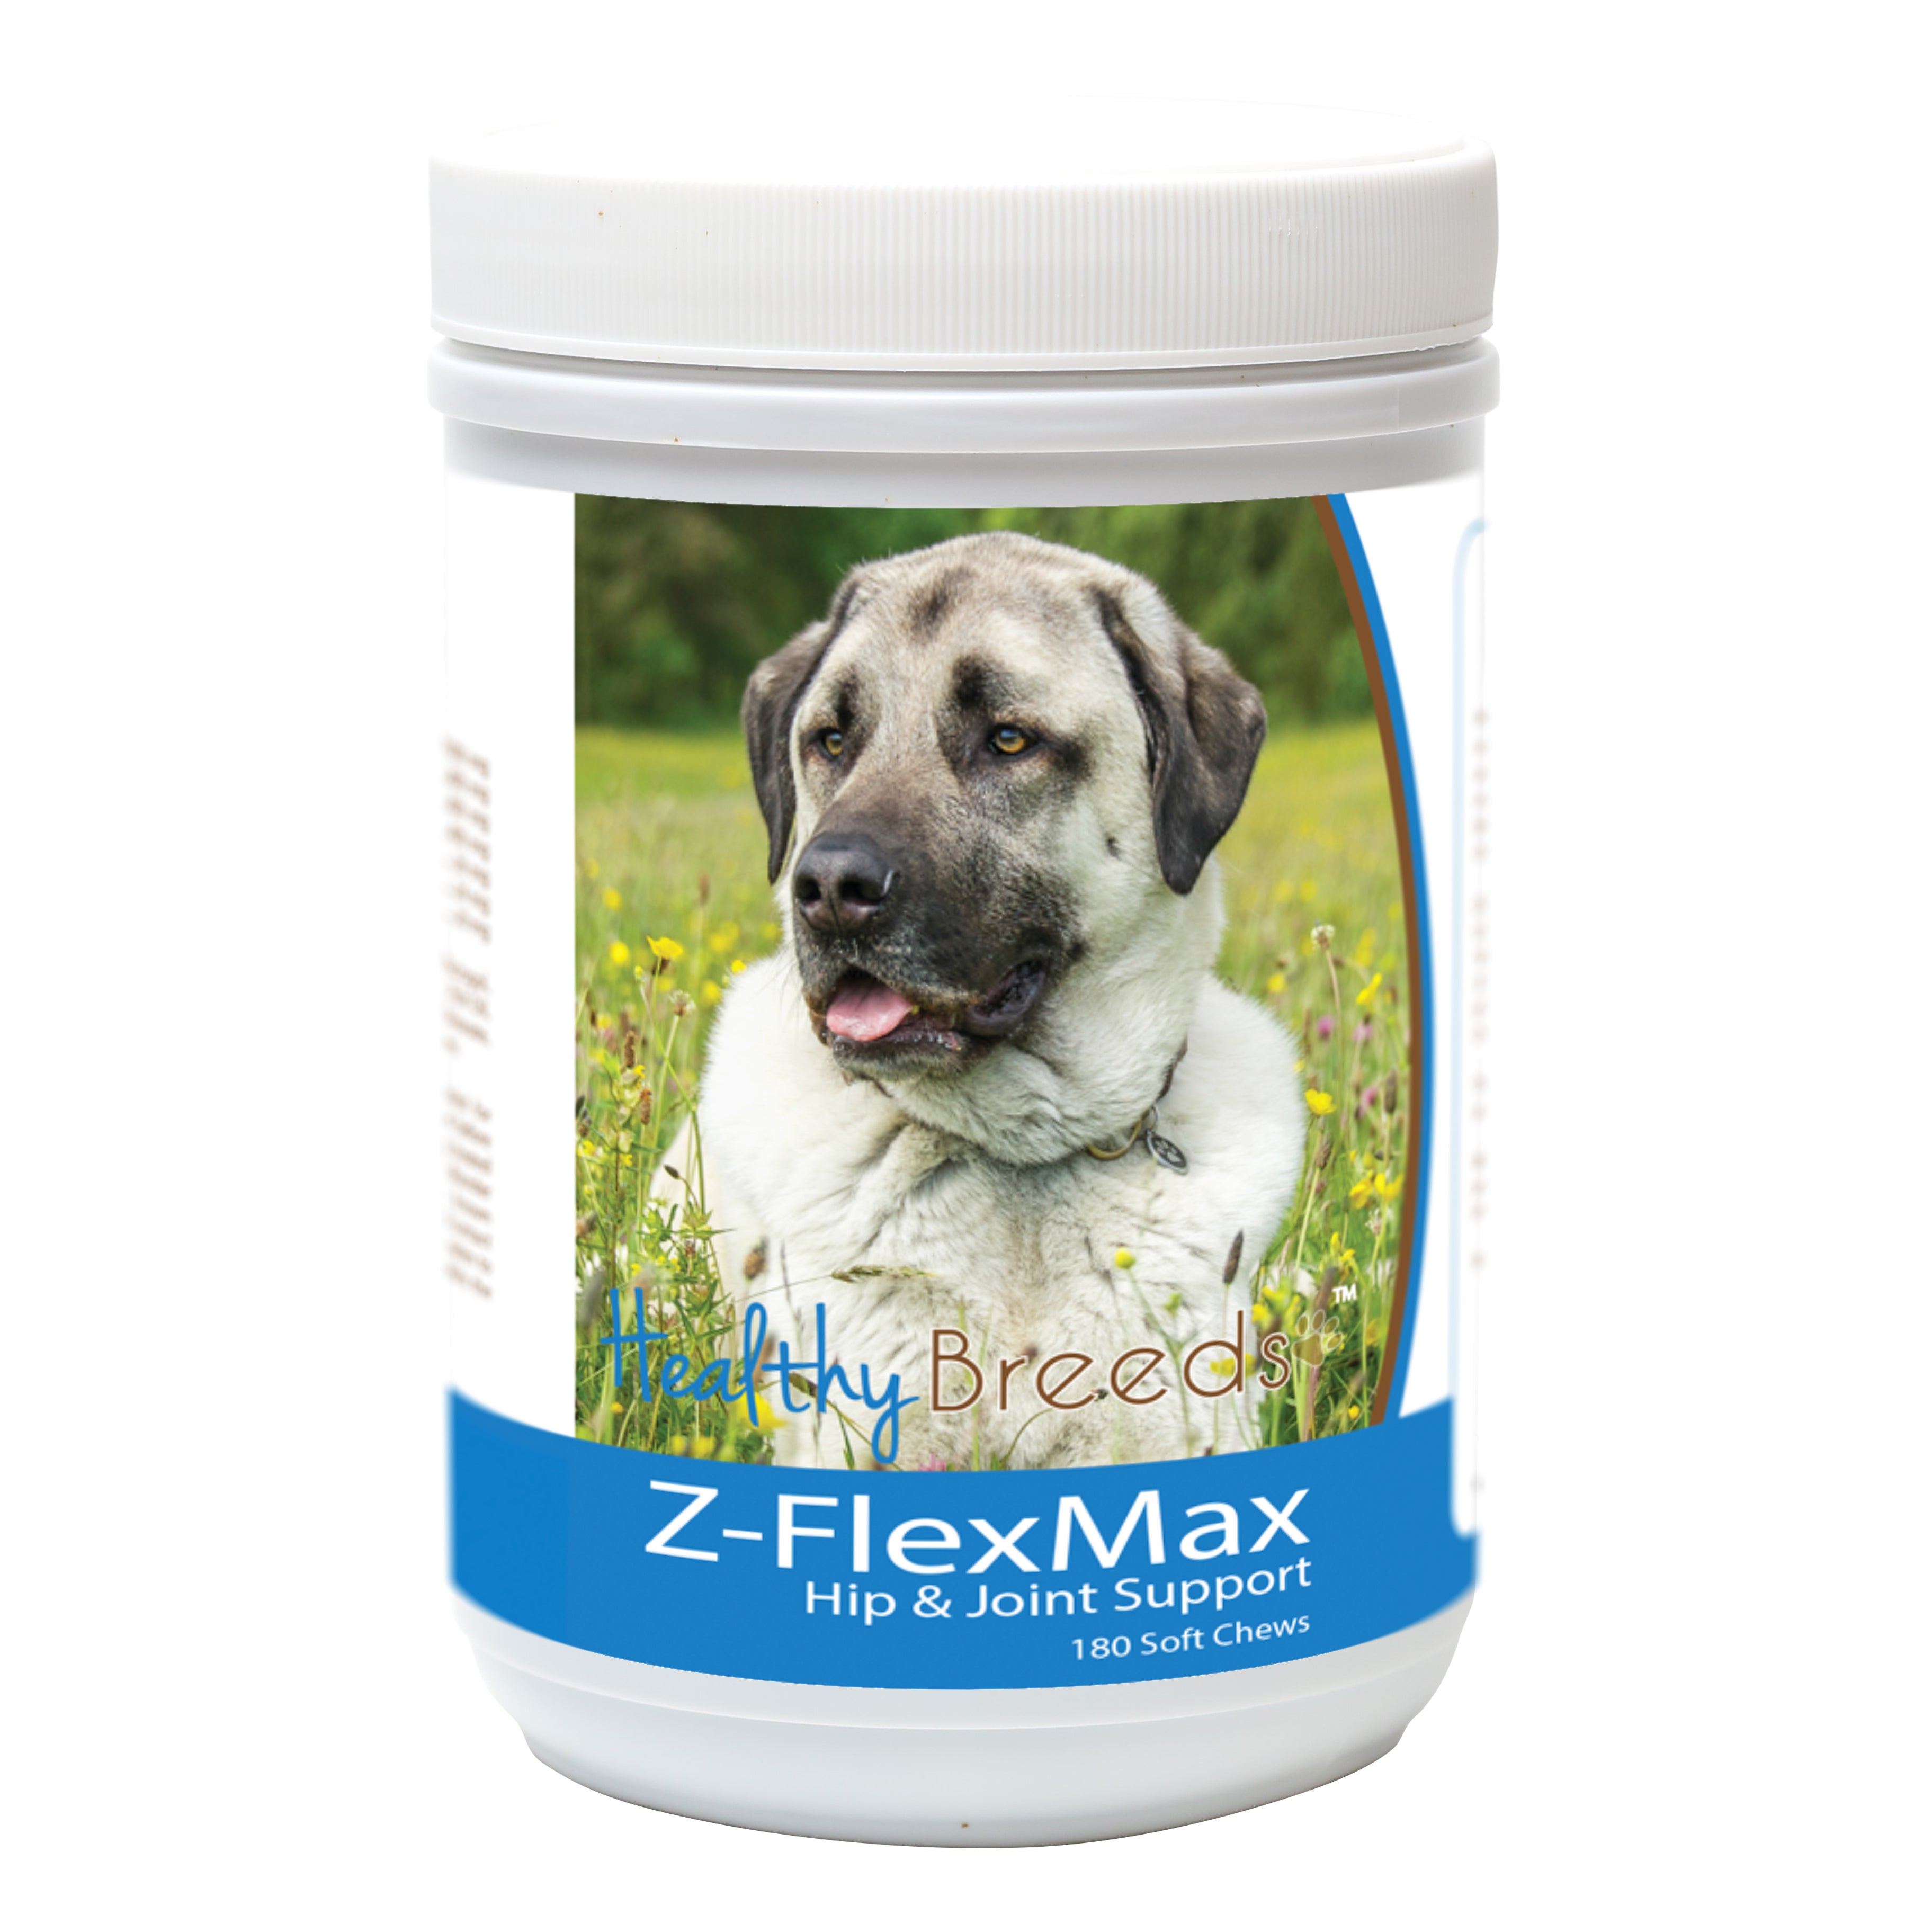 Anatolian Shepherd Dog Z-Flex Max Dog Hip and Joint Support 180 Count